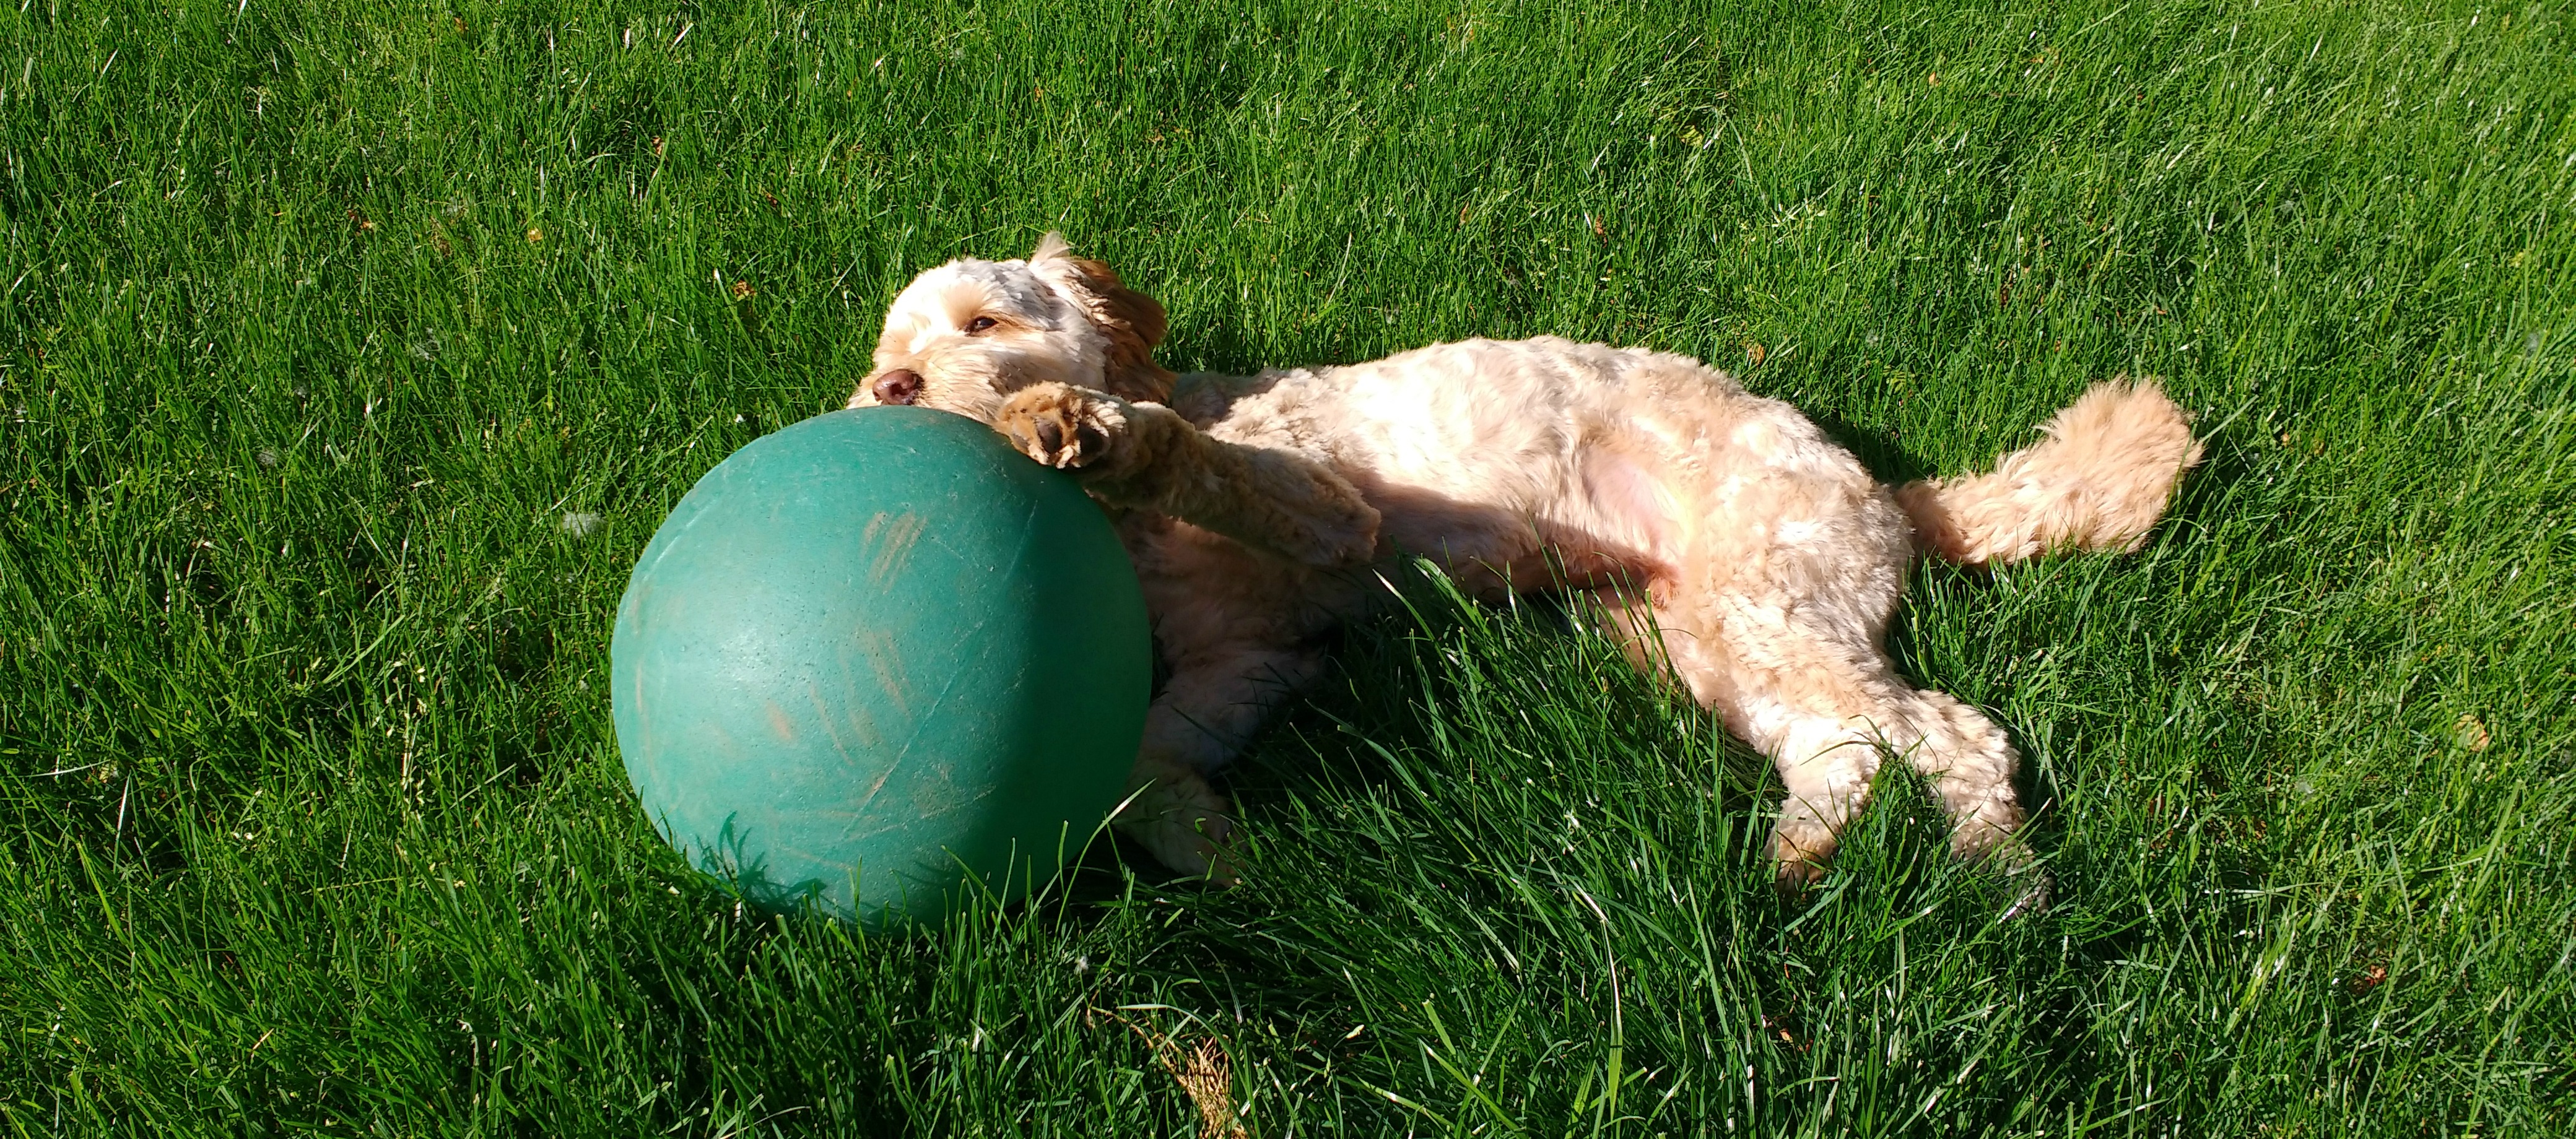 Hachi lying in the grass with a big green-blue ball in his
                        mouth and paws.